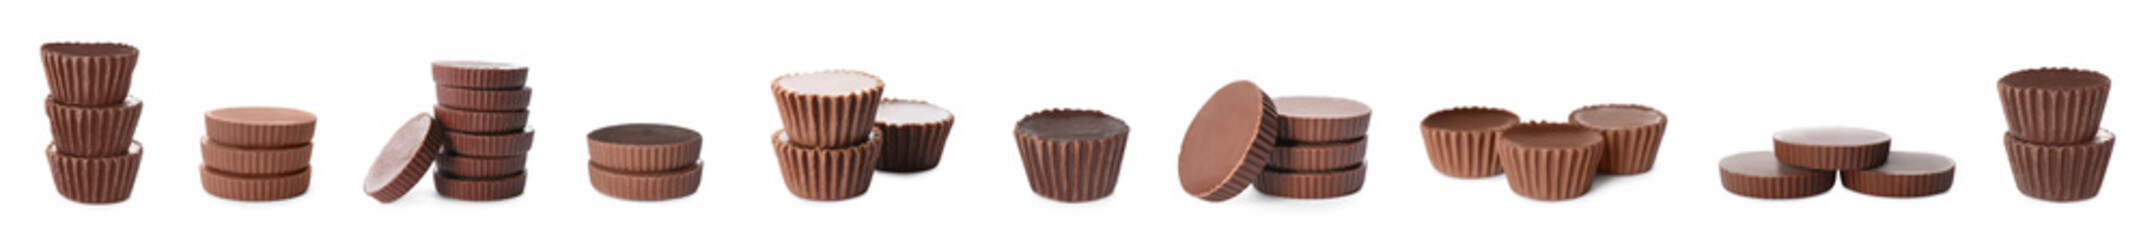 Set with delicious peanut butter cups on white background. Banner design